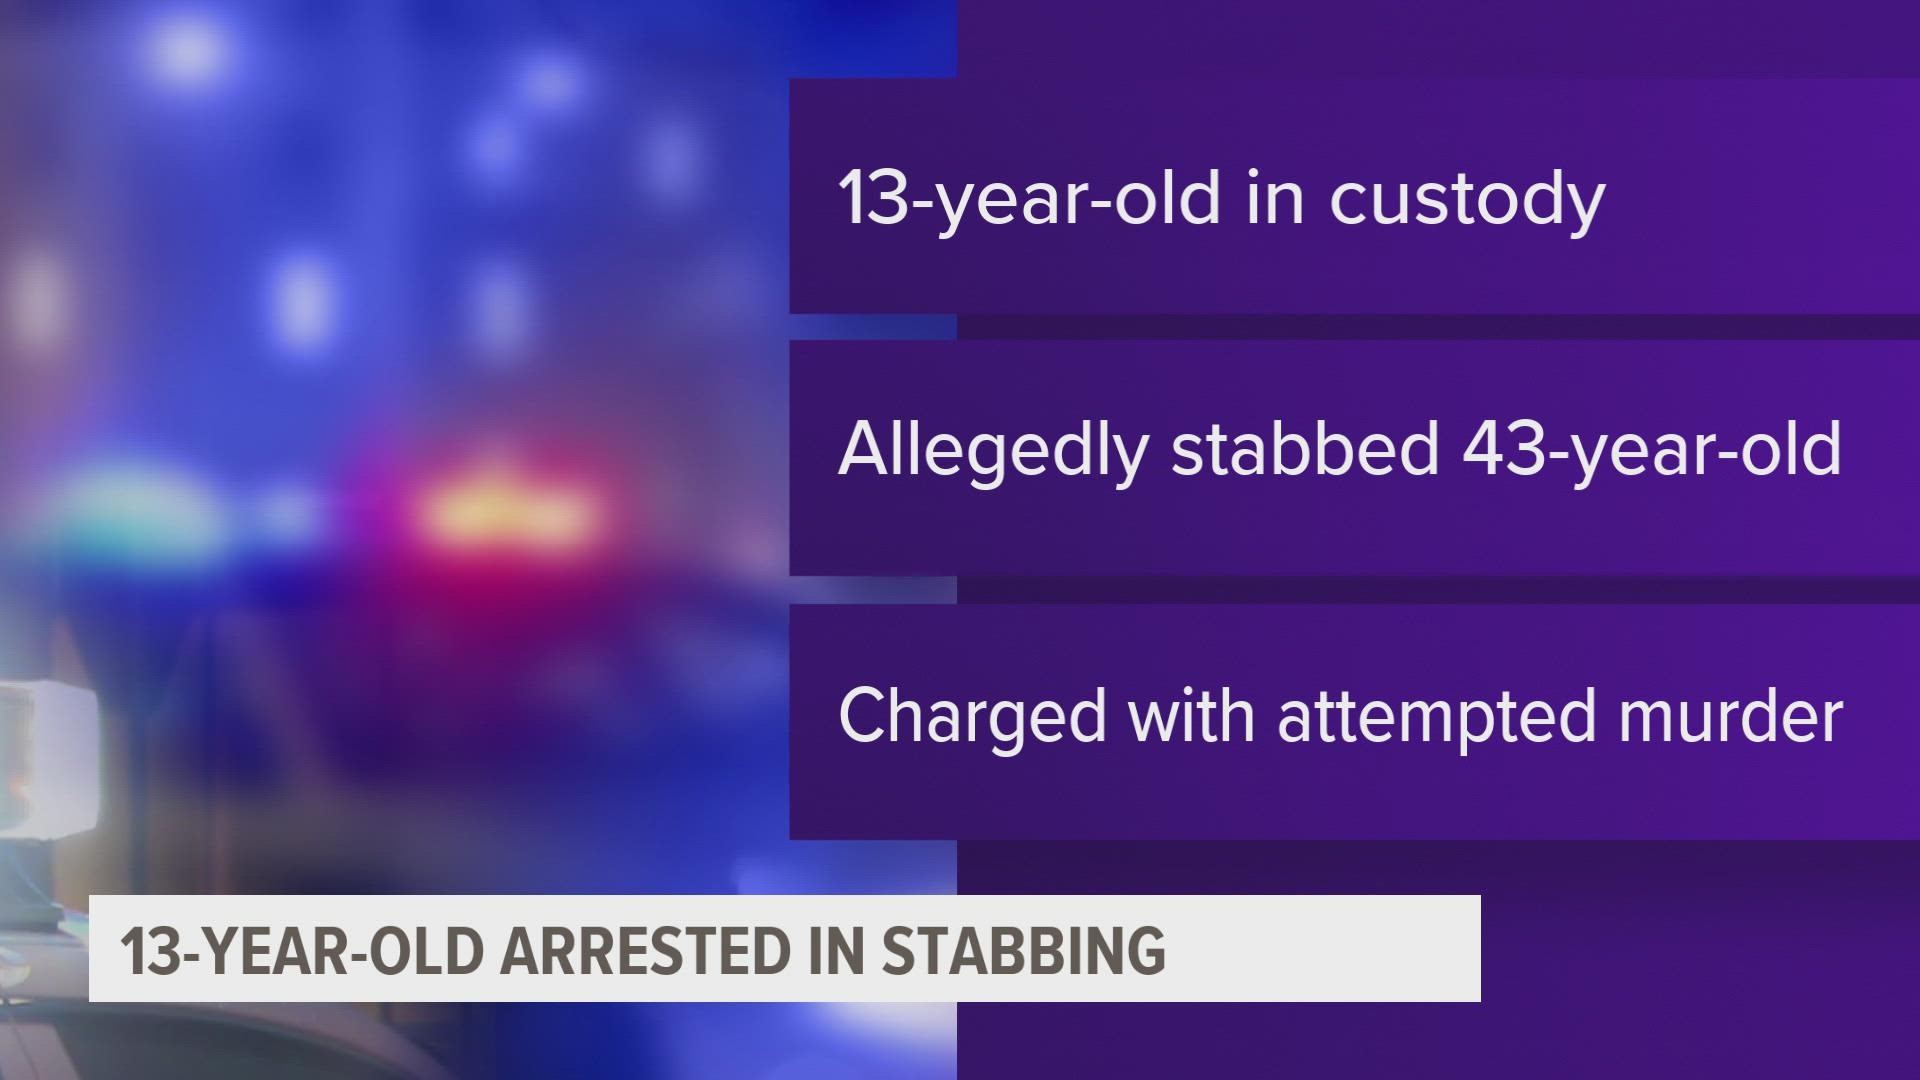 The boy is charged with attempted murder, a Class B felony.